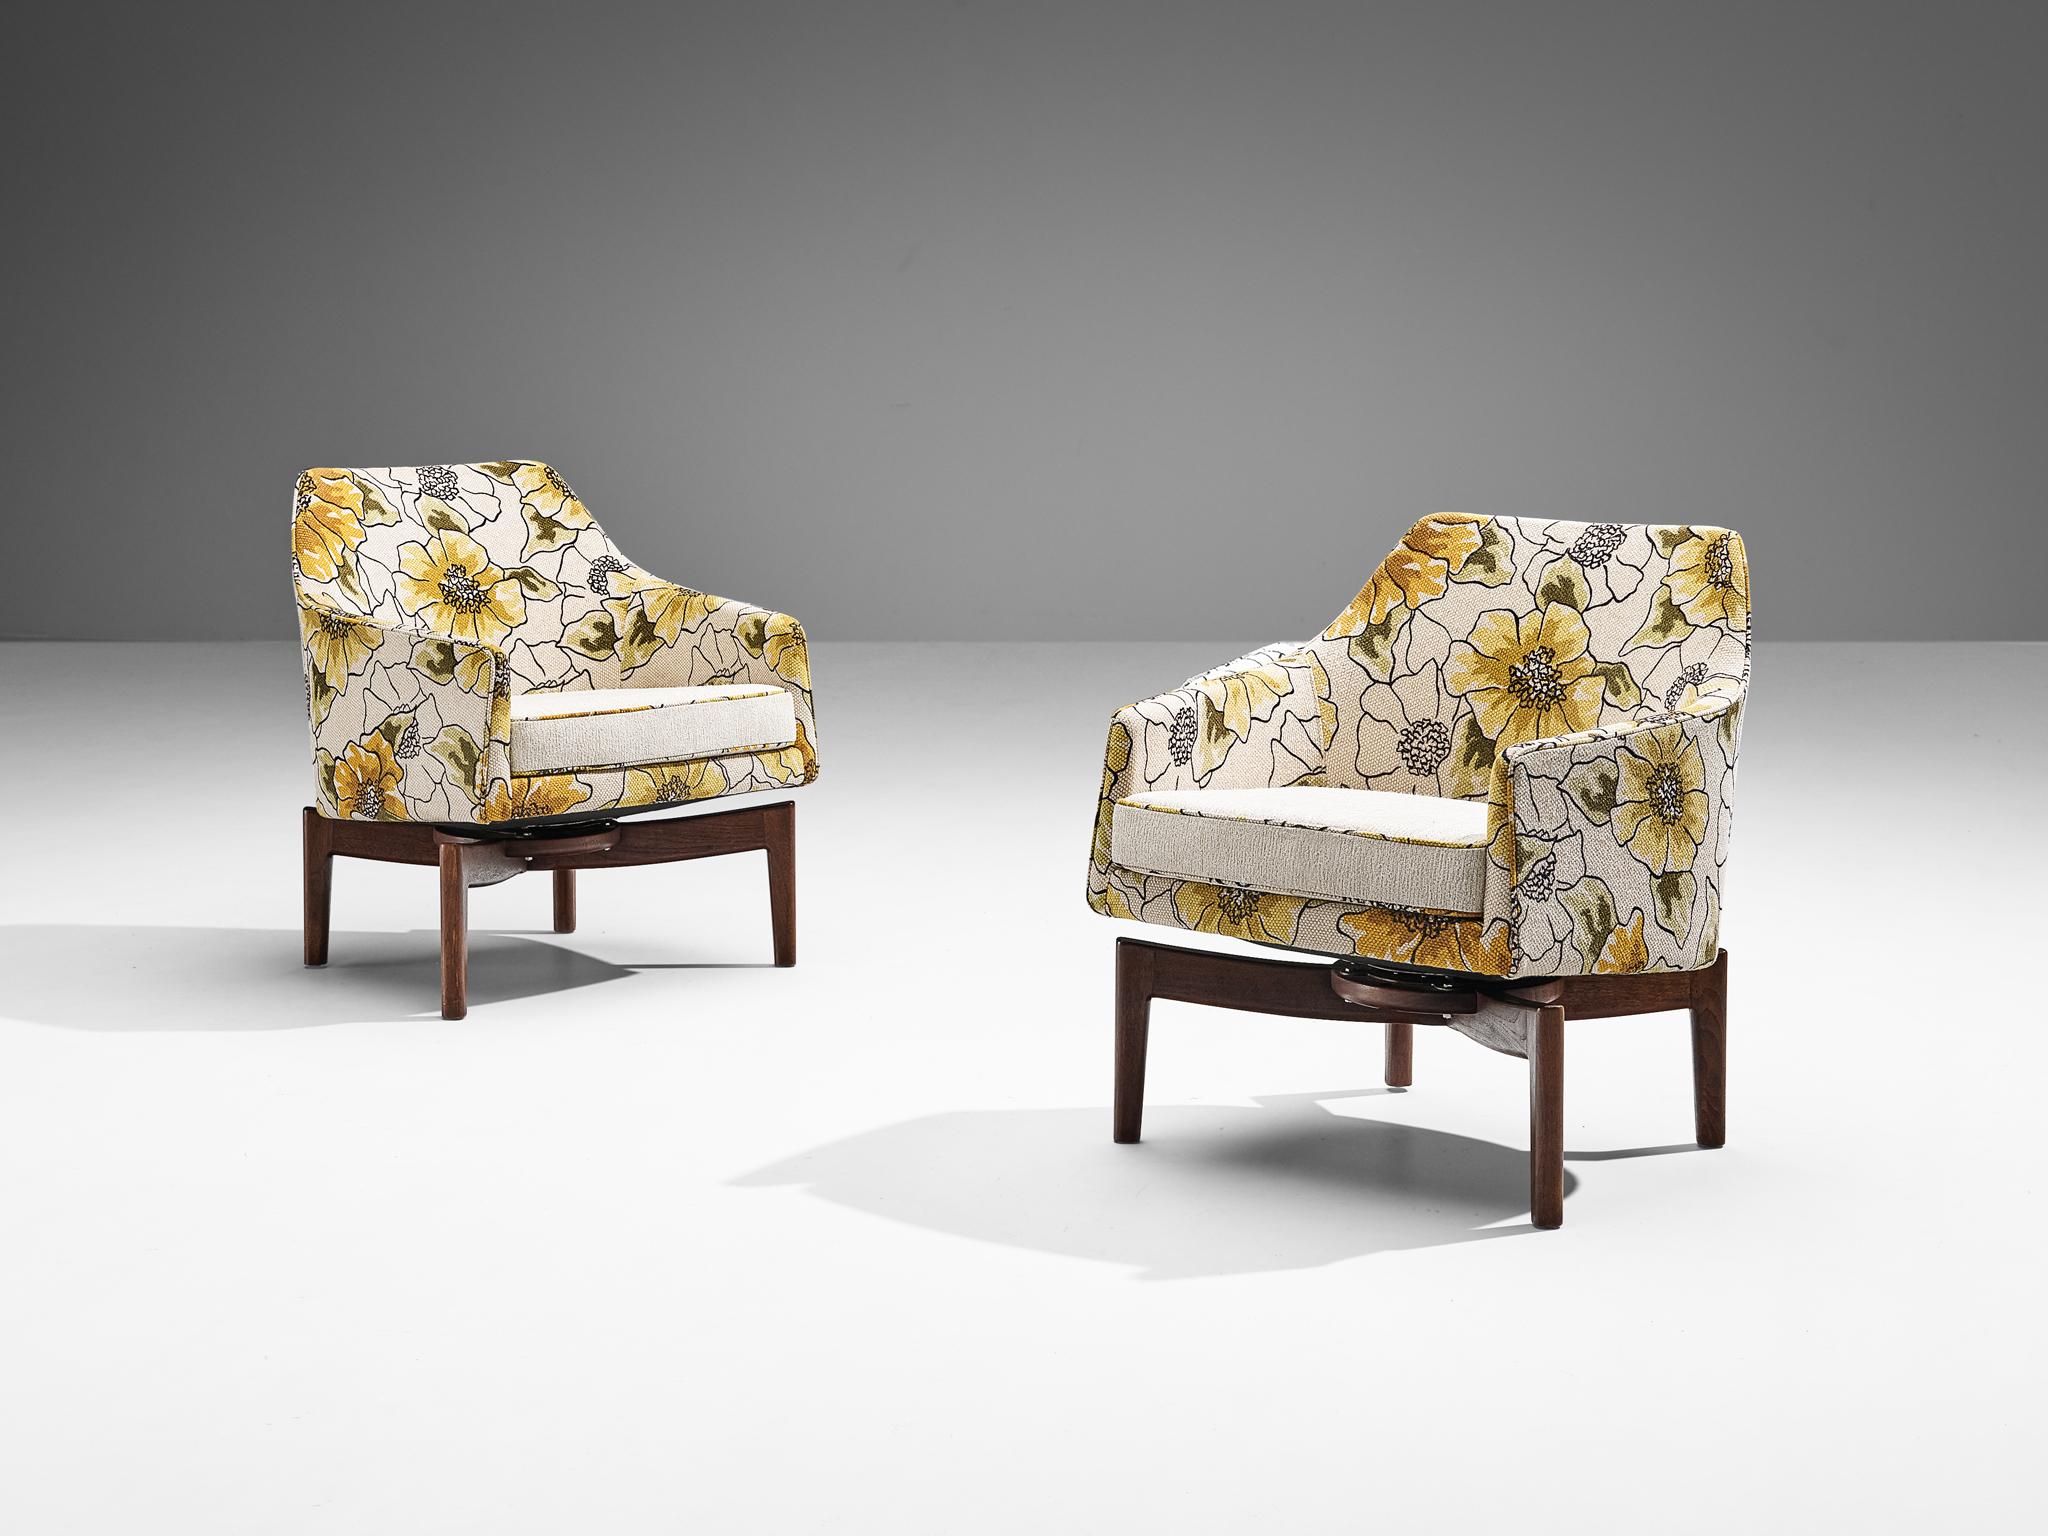 Jens Risom for Jens Risom Design, pair of swivel lounge chairs, teak, fabric, United States, 1960s.

This extraordinary pair of lounge chair is designed by Danish designer Jens Risom. It is executed in a teak frame and floral fabric in beige and